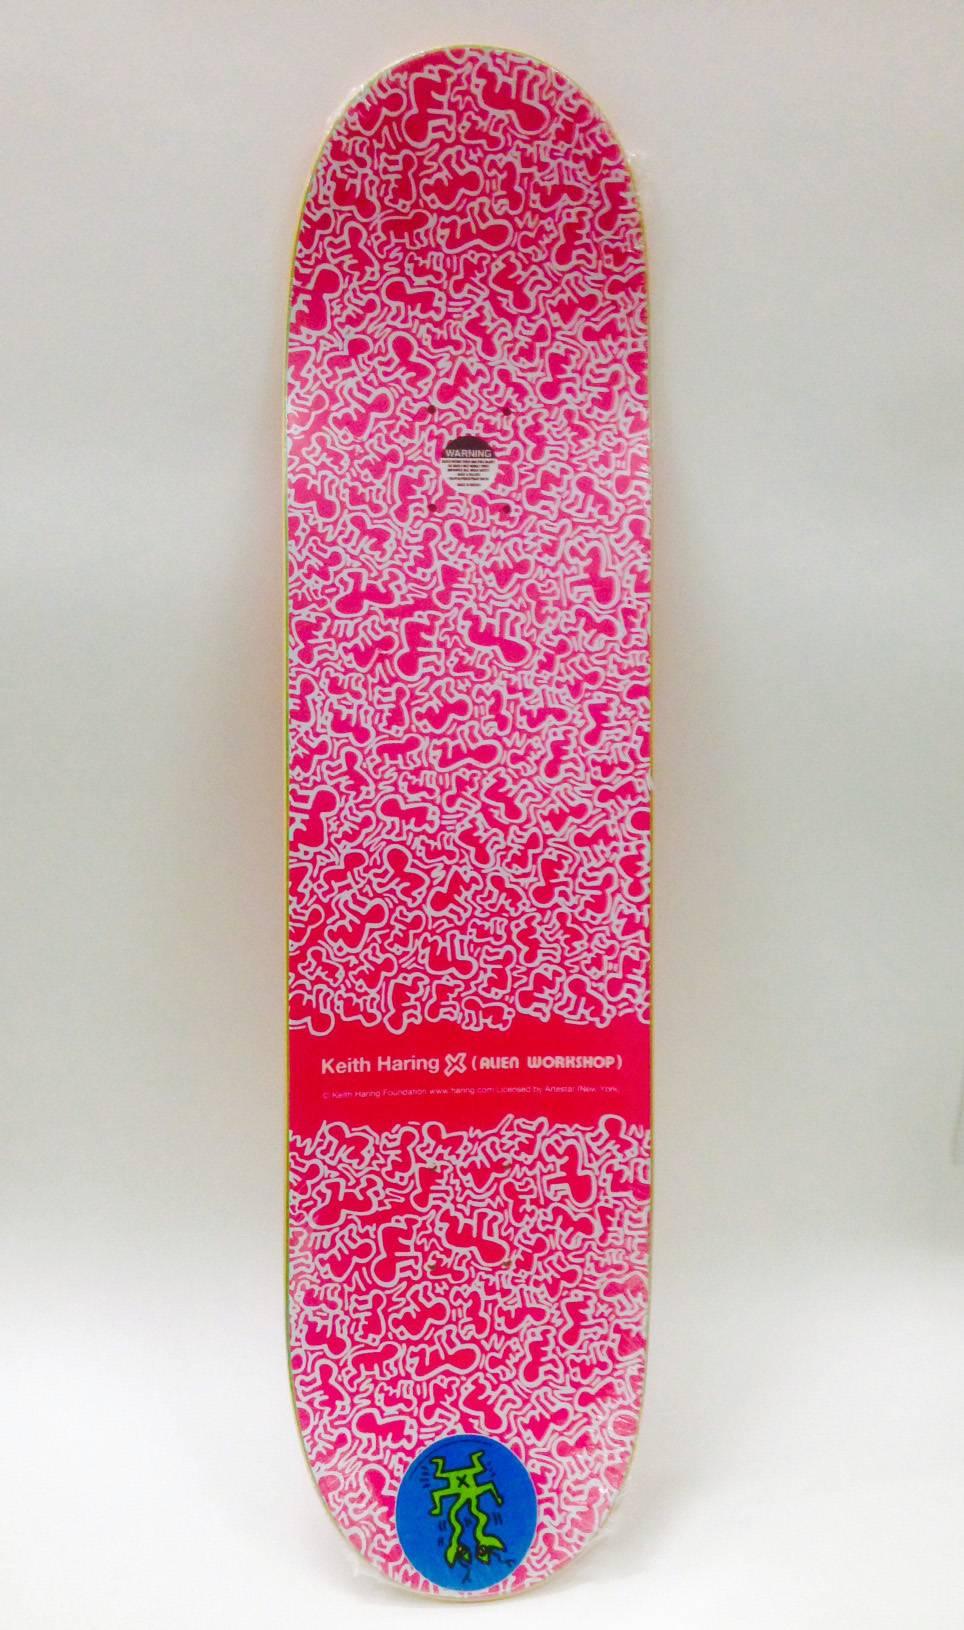 Keith Haring Skateboard Deck (Purple) - Pop Art Art by (after) Keith Haring